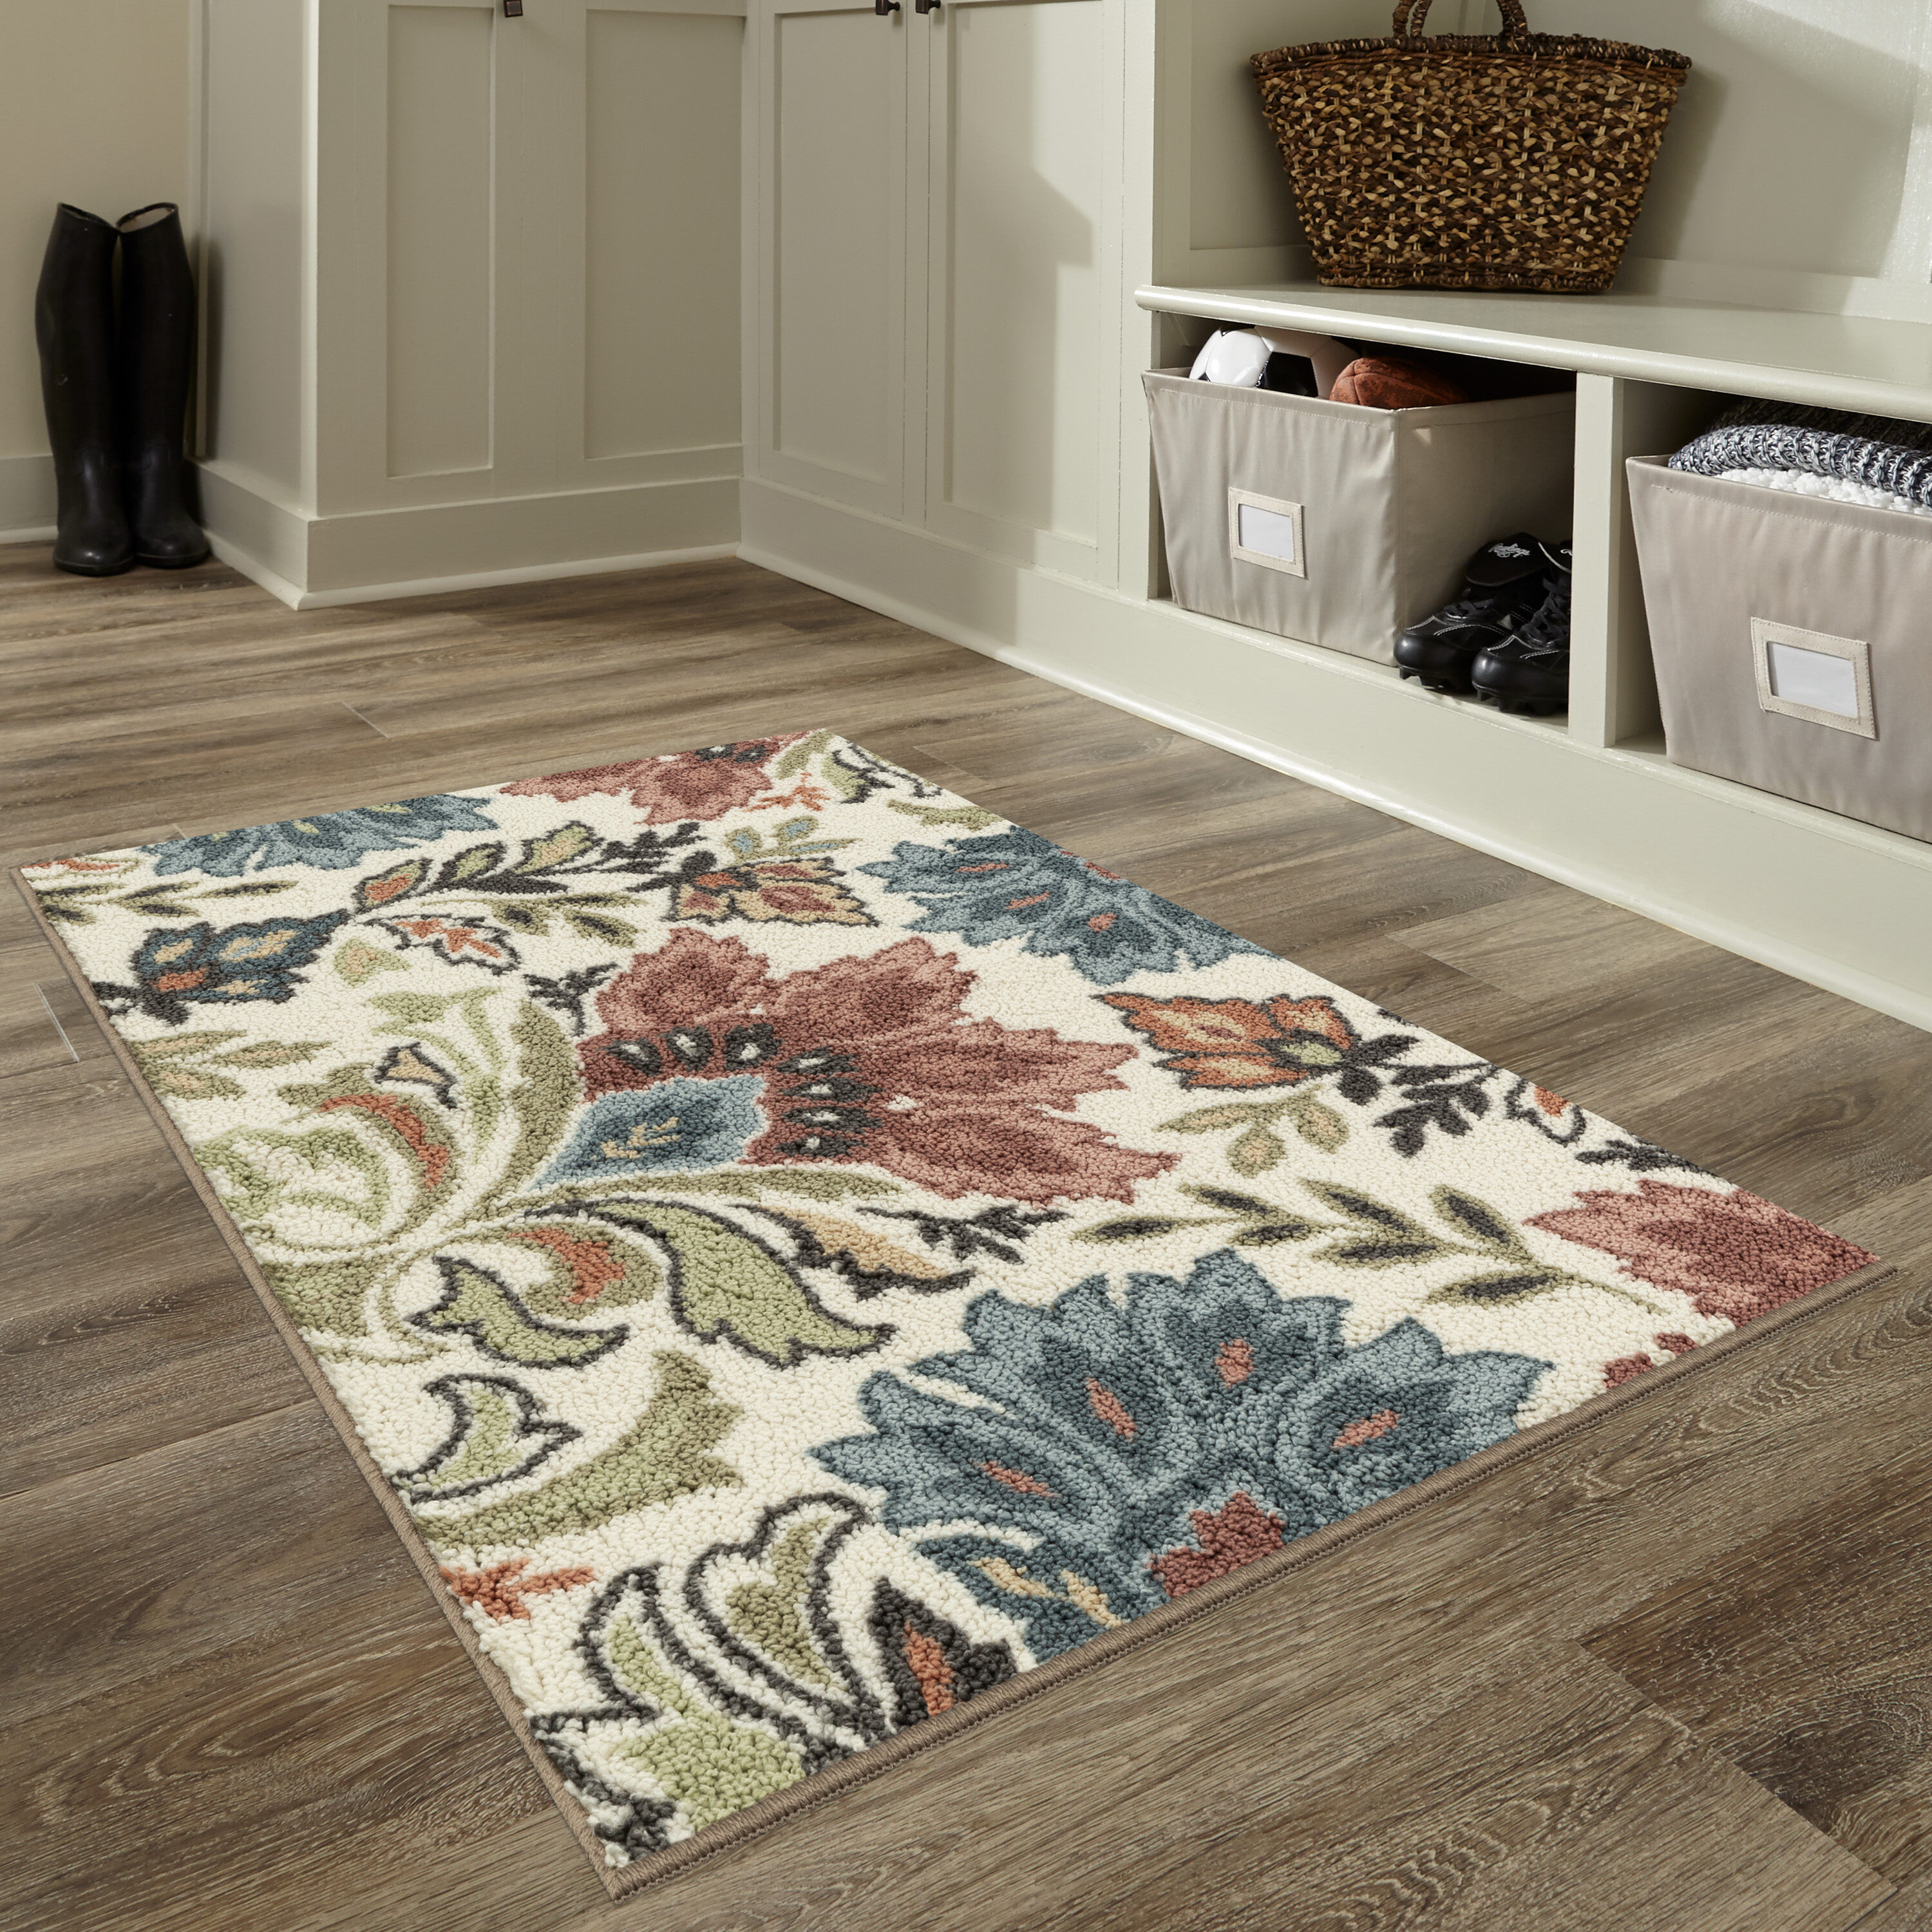 Non-Slip Grip Rugs at